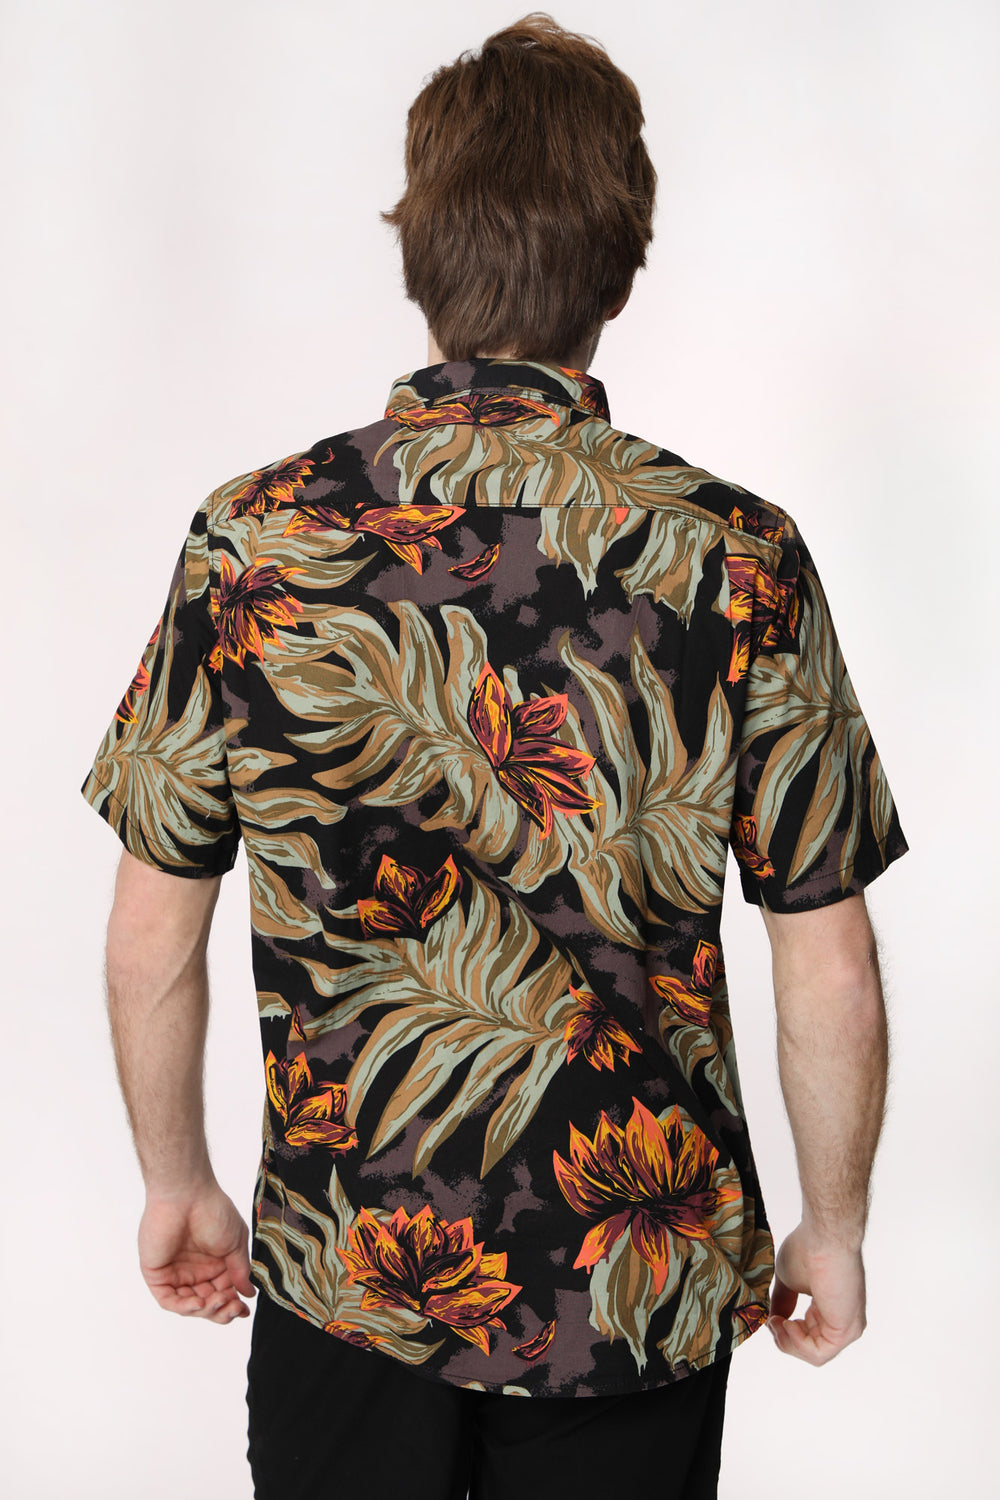 Zoo York Mens Tropical Printed Button-Up Zoo York Mens Tropical Printed Button-Up